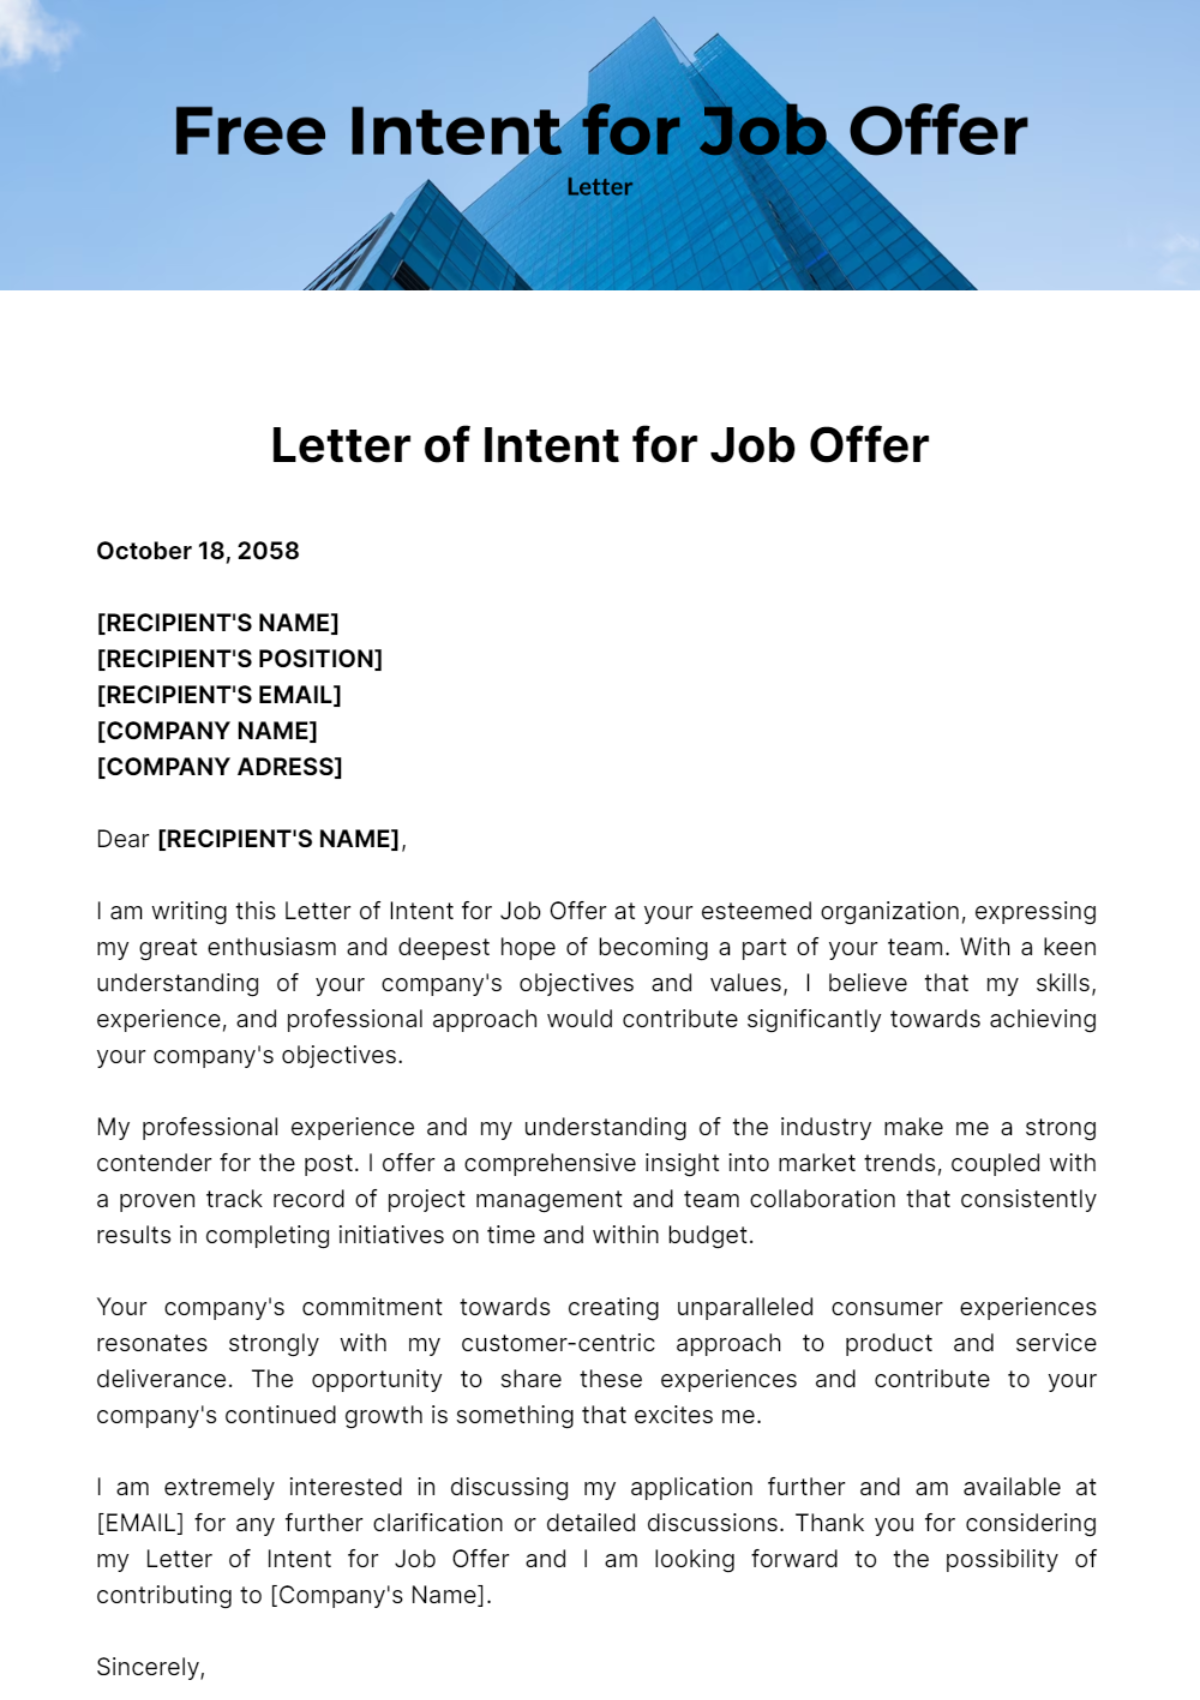 Free Letter of Intent for Job Offer Template